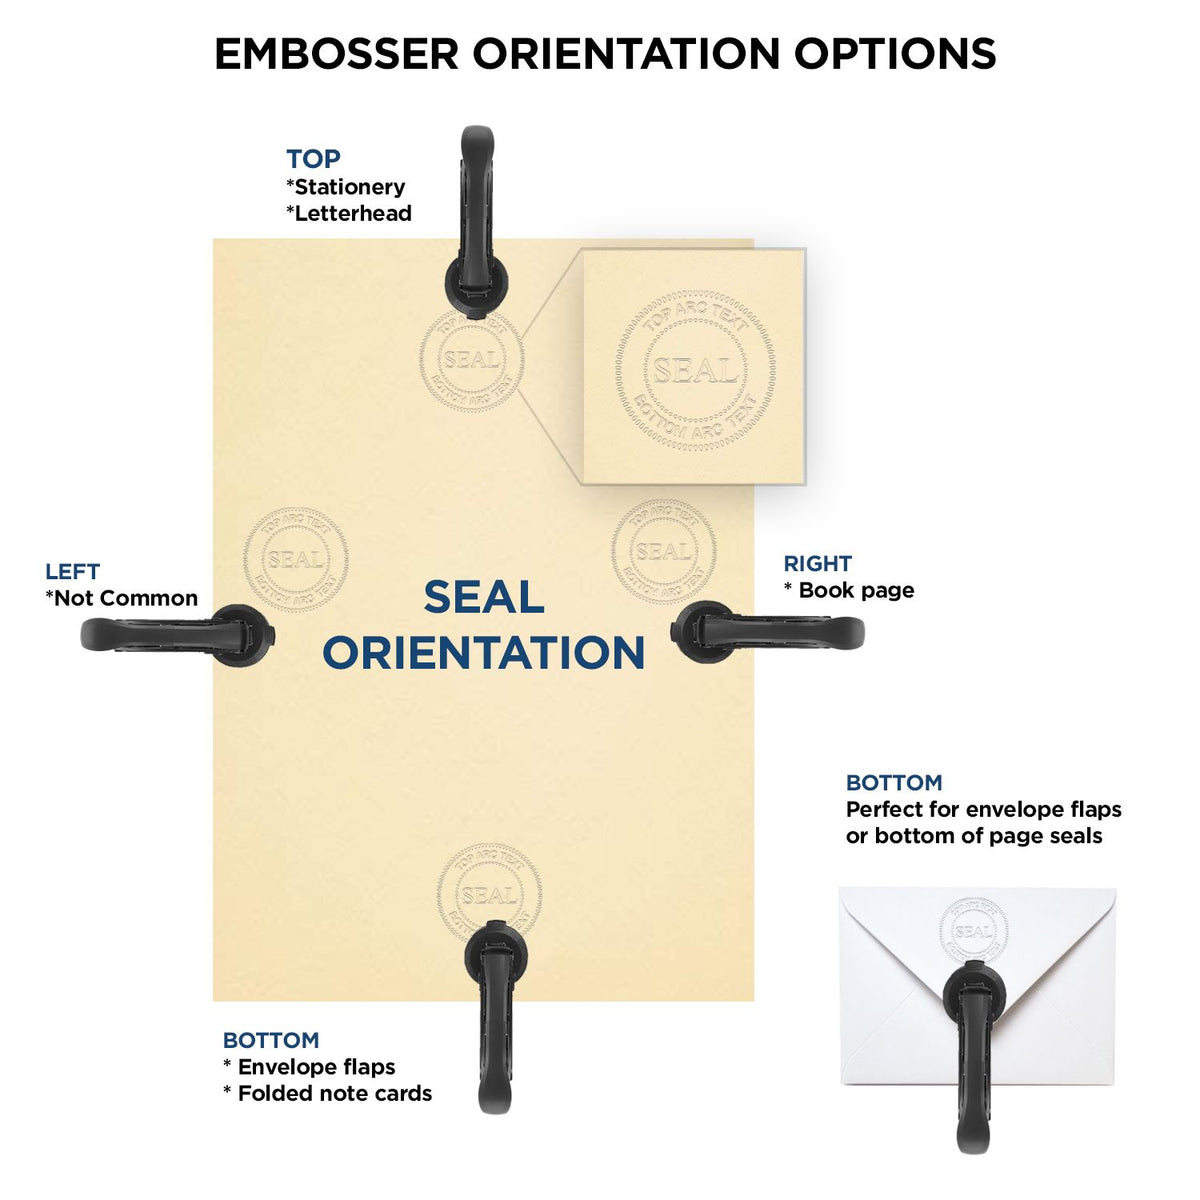 An infographic for the Long Reach Louisiana PE Seal showing embosser orientation, this is showing examples of a top, bottom, right and left insert.